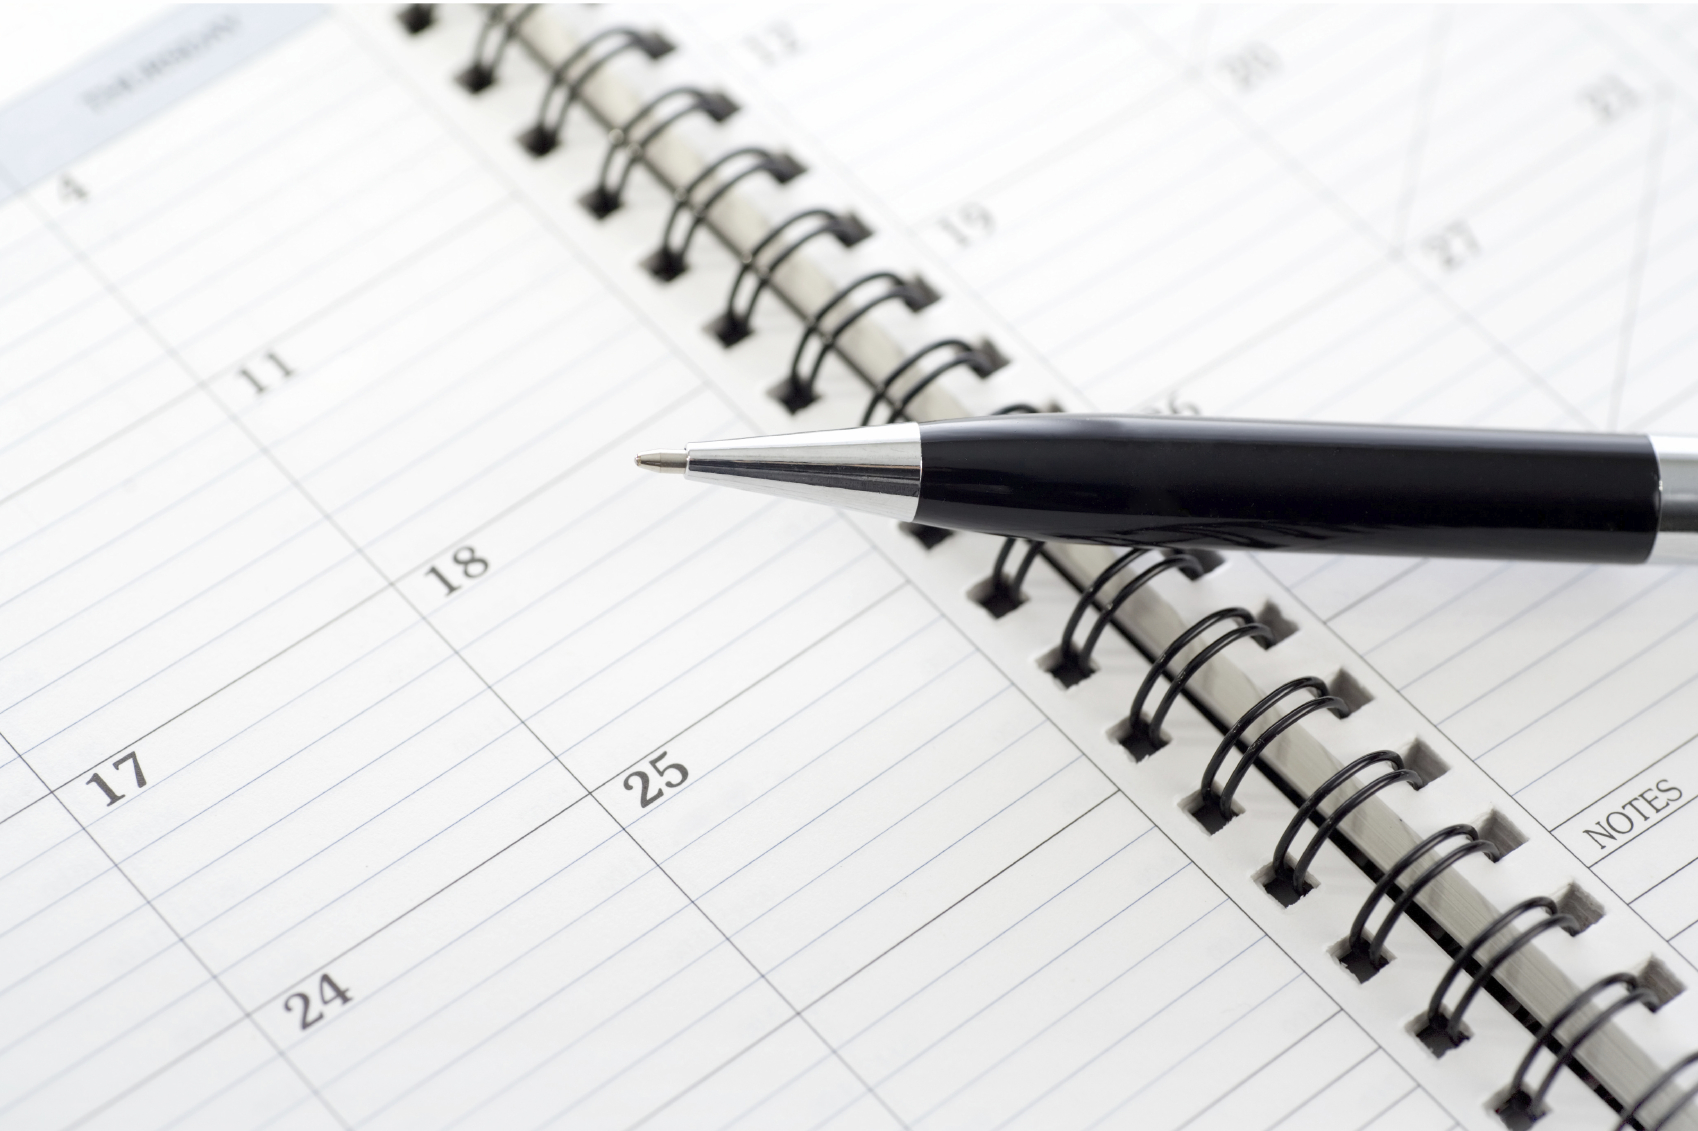 Appointment Book Calendar and Pen - WOU Newsflash Team